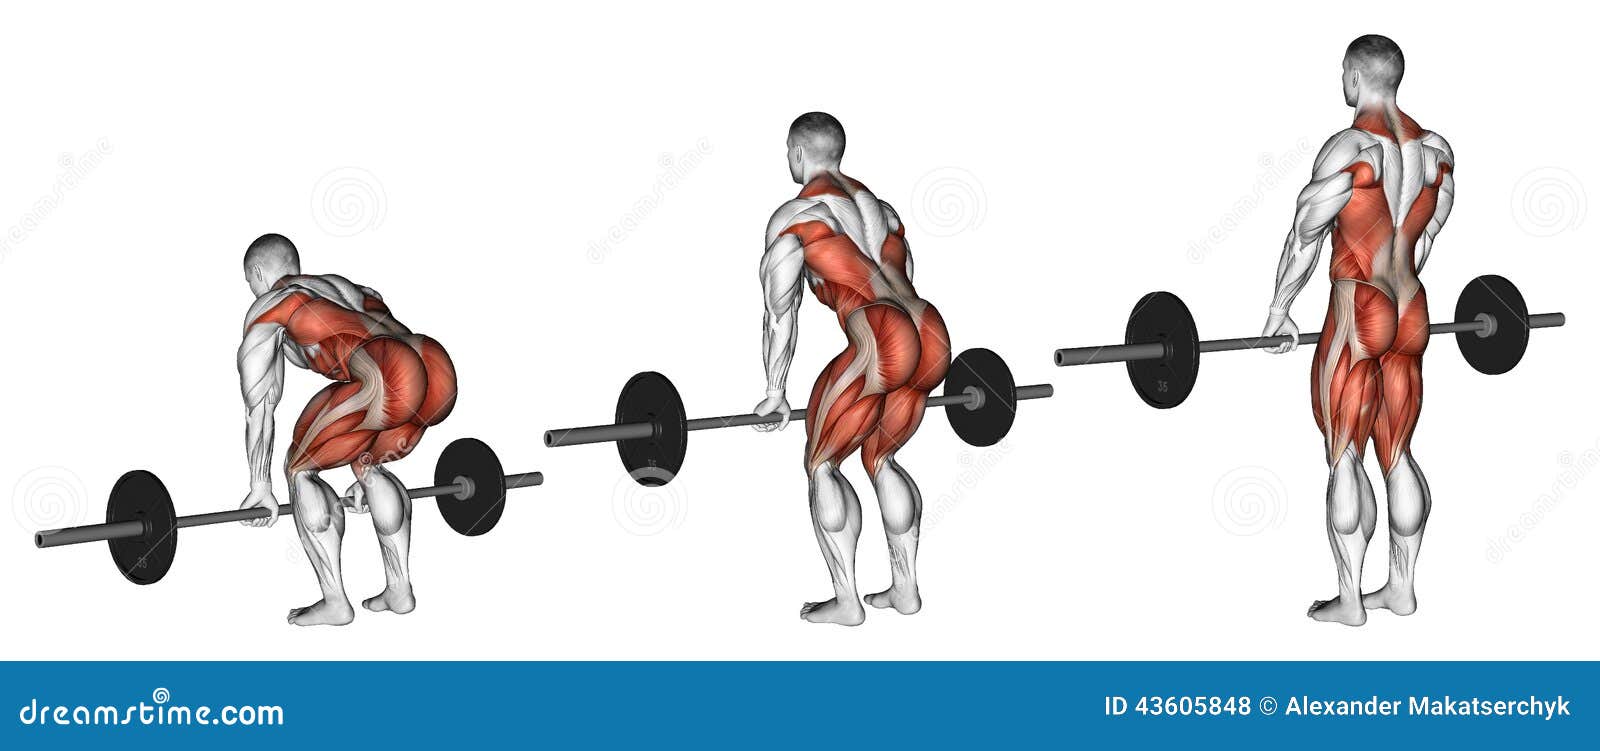 deadlift muscles worked diagram